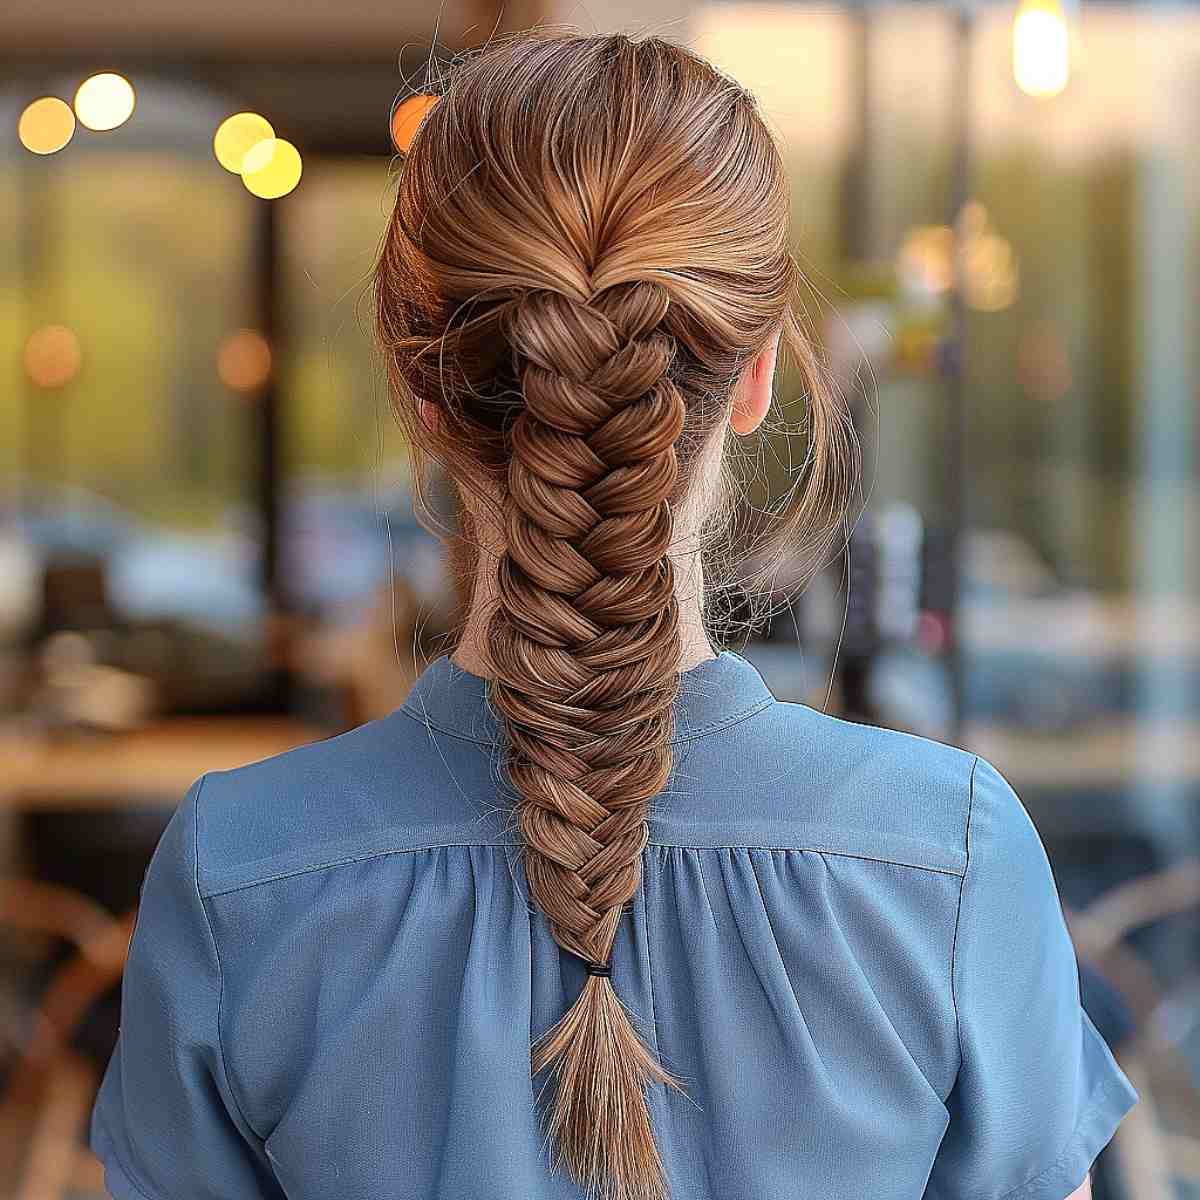 Cool hairstyles for different hair types for New Year's Eve party